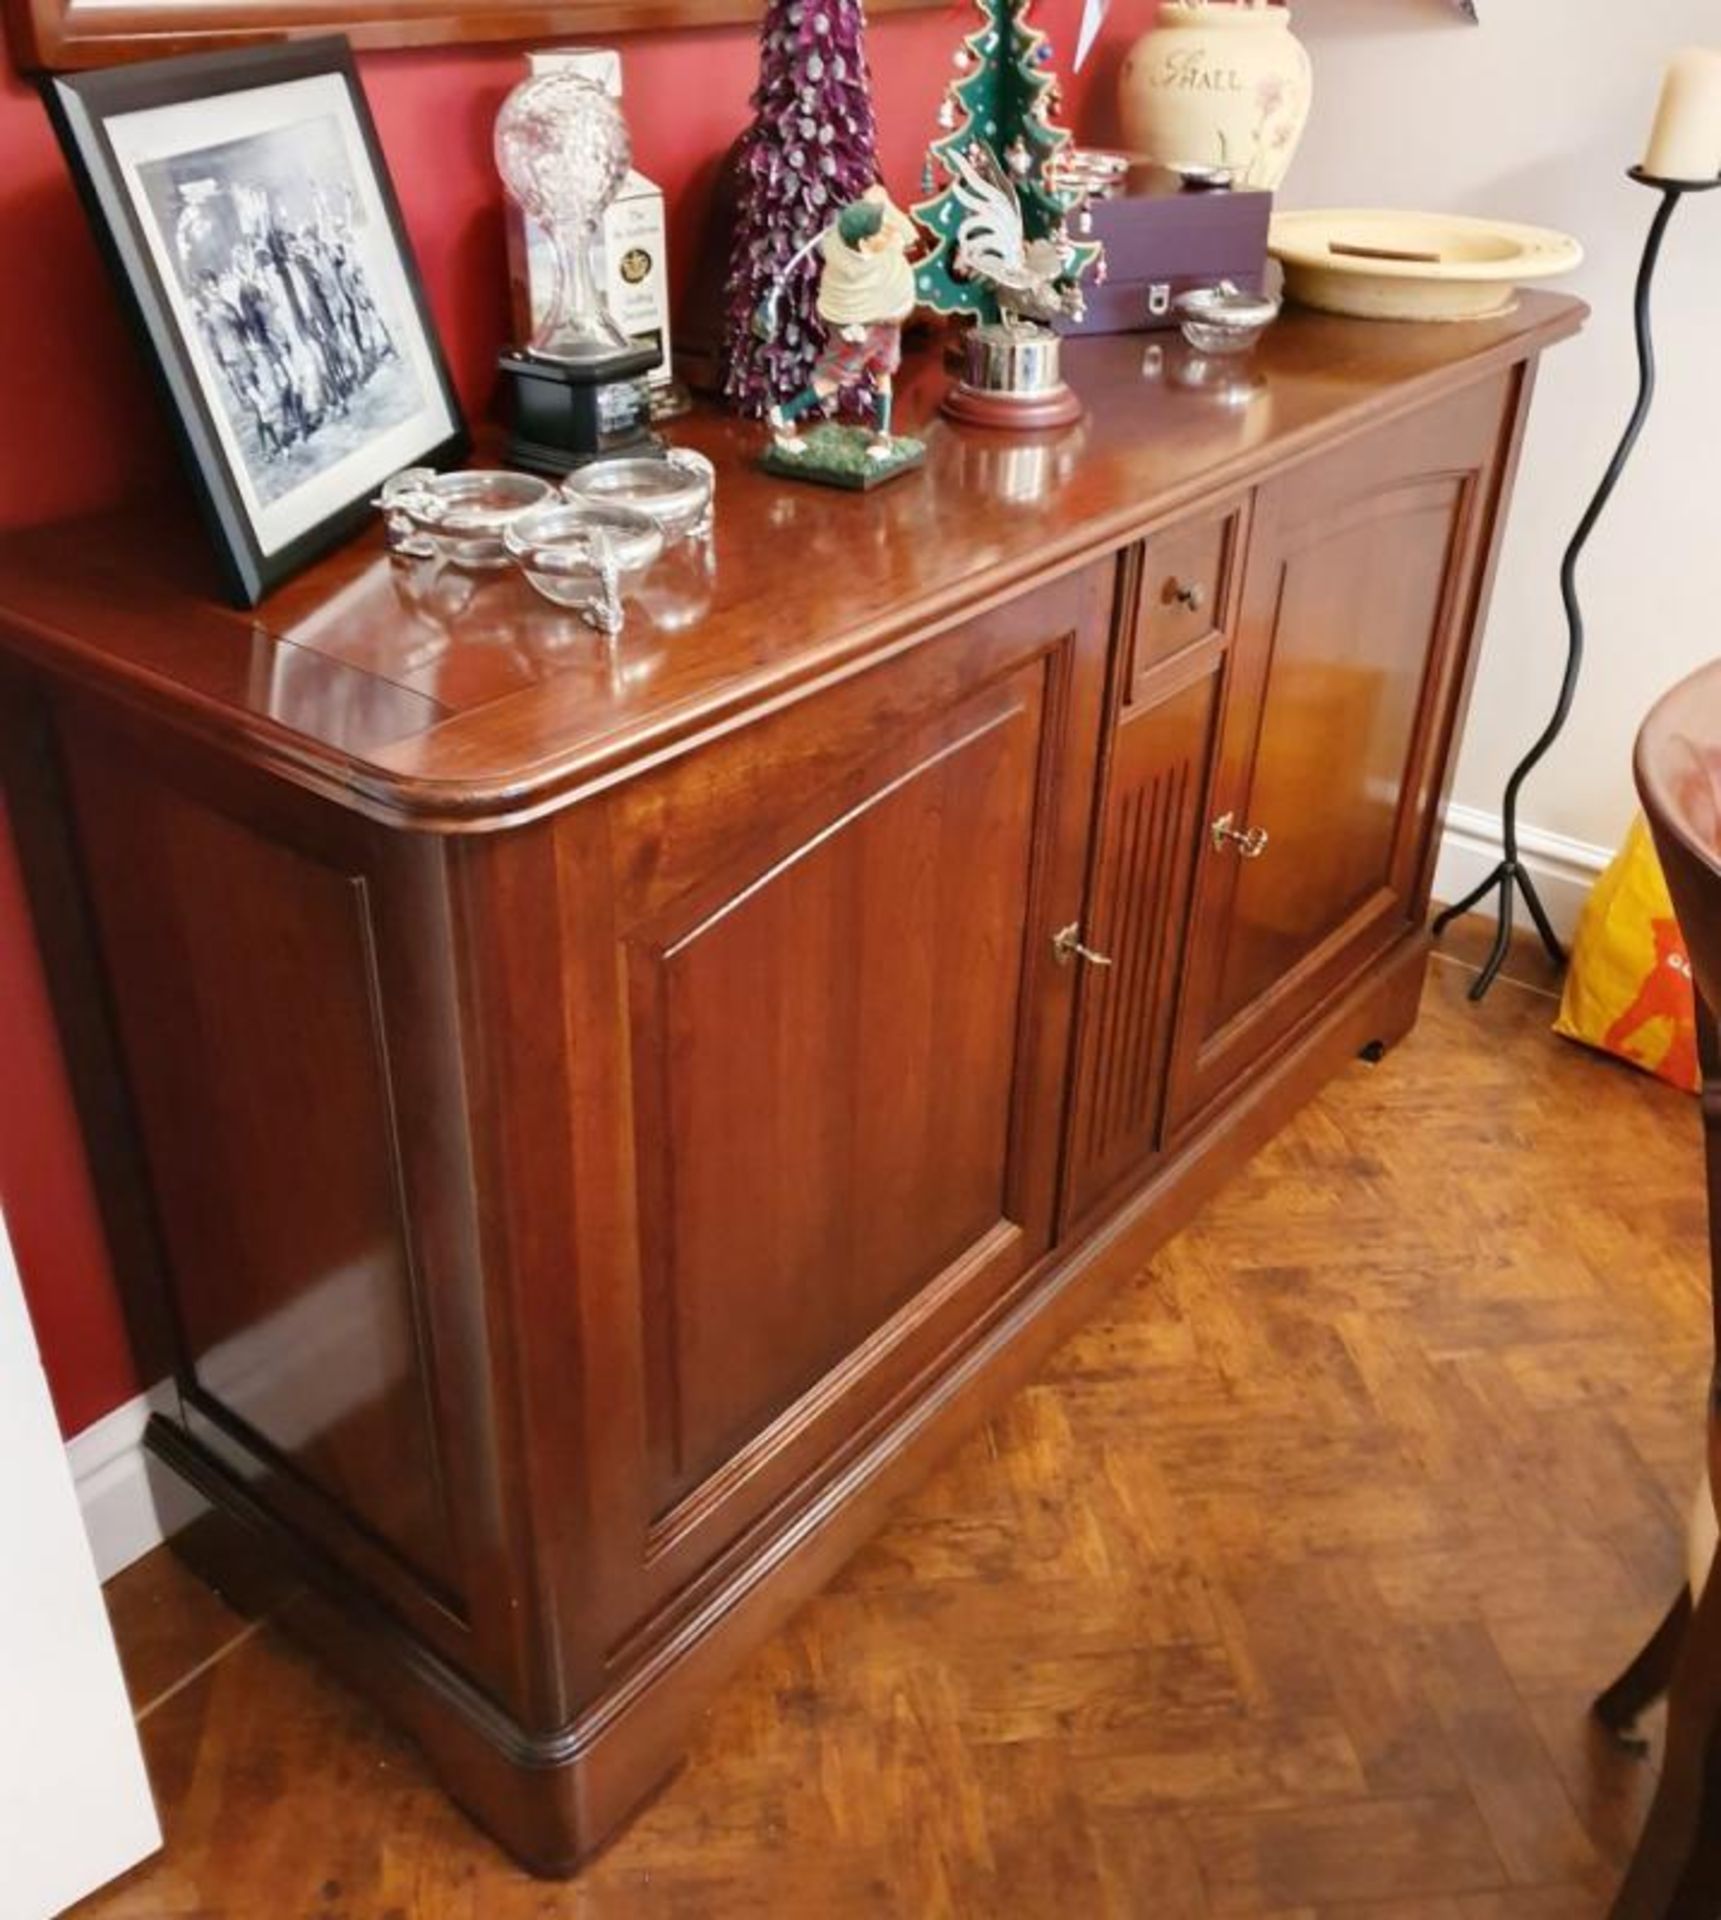 1 x GRANGE Sideboard in Cherry Wood - CL473 - Location: Bowdon WA14 - NO VAT ON HAMMER - Used In Exc